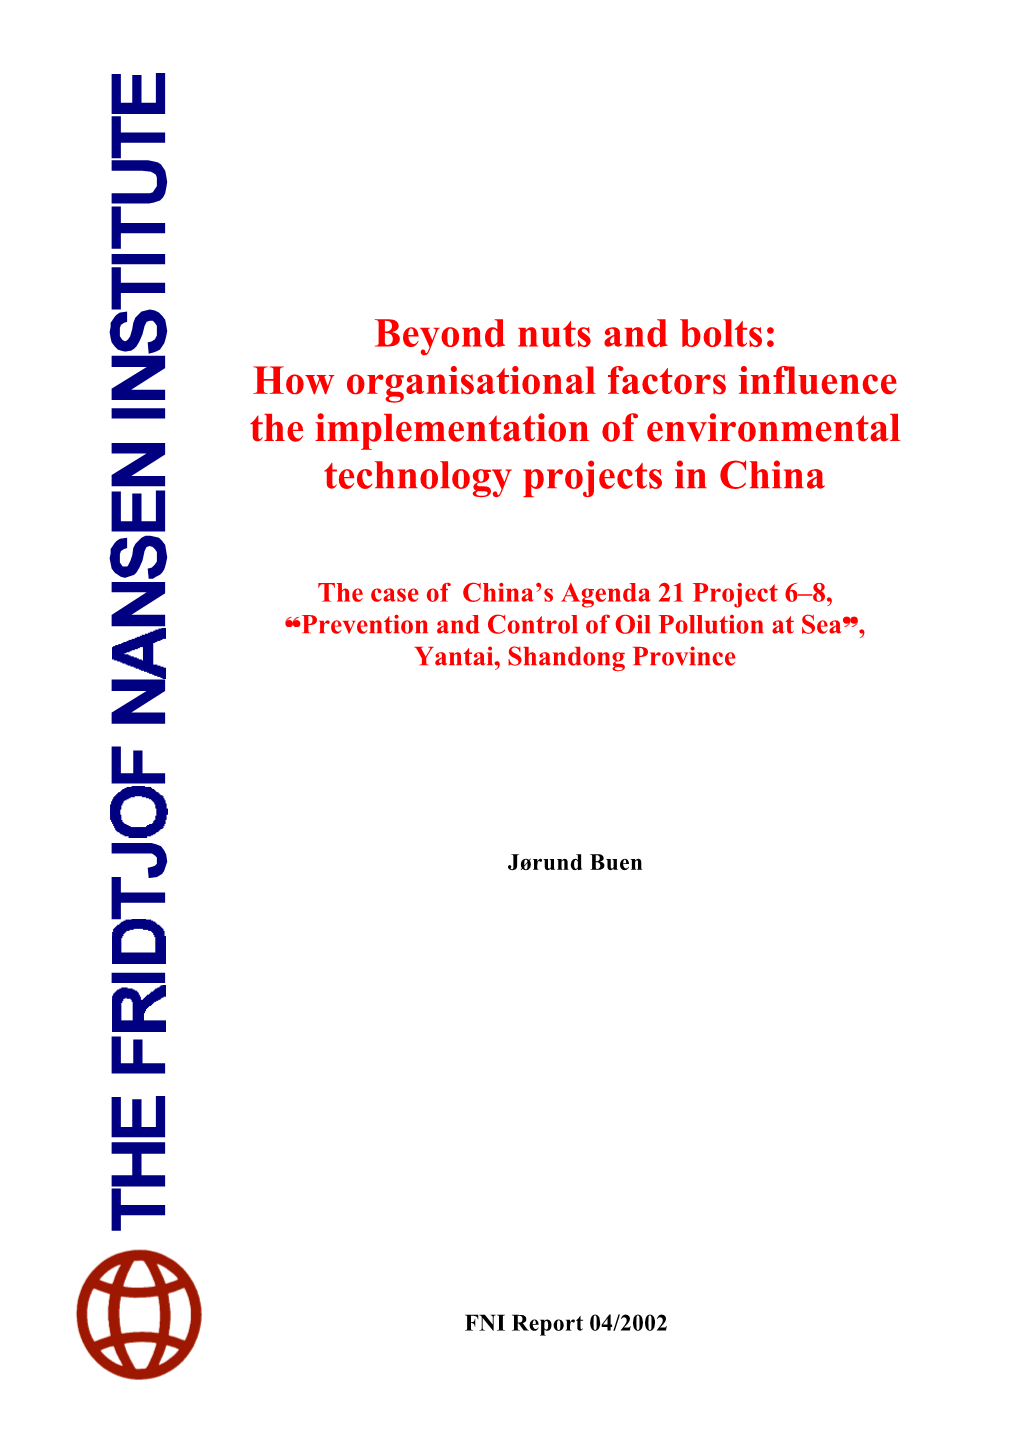 Beyond Nuts and Bolts: How Organisational Factors Influence the Implementation of Environmental Technology Projects in China